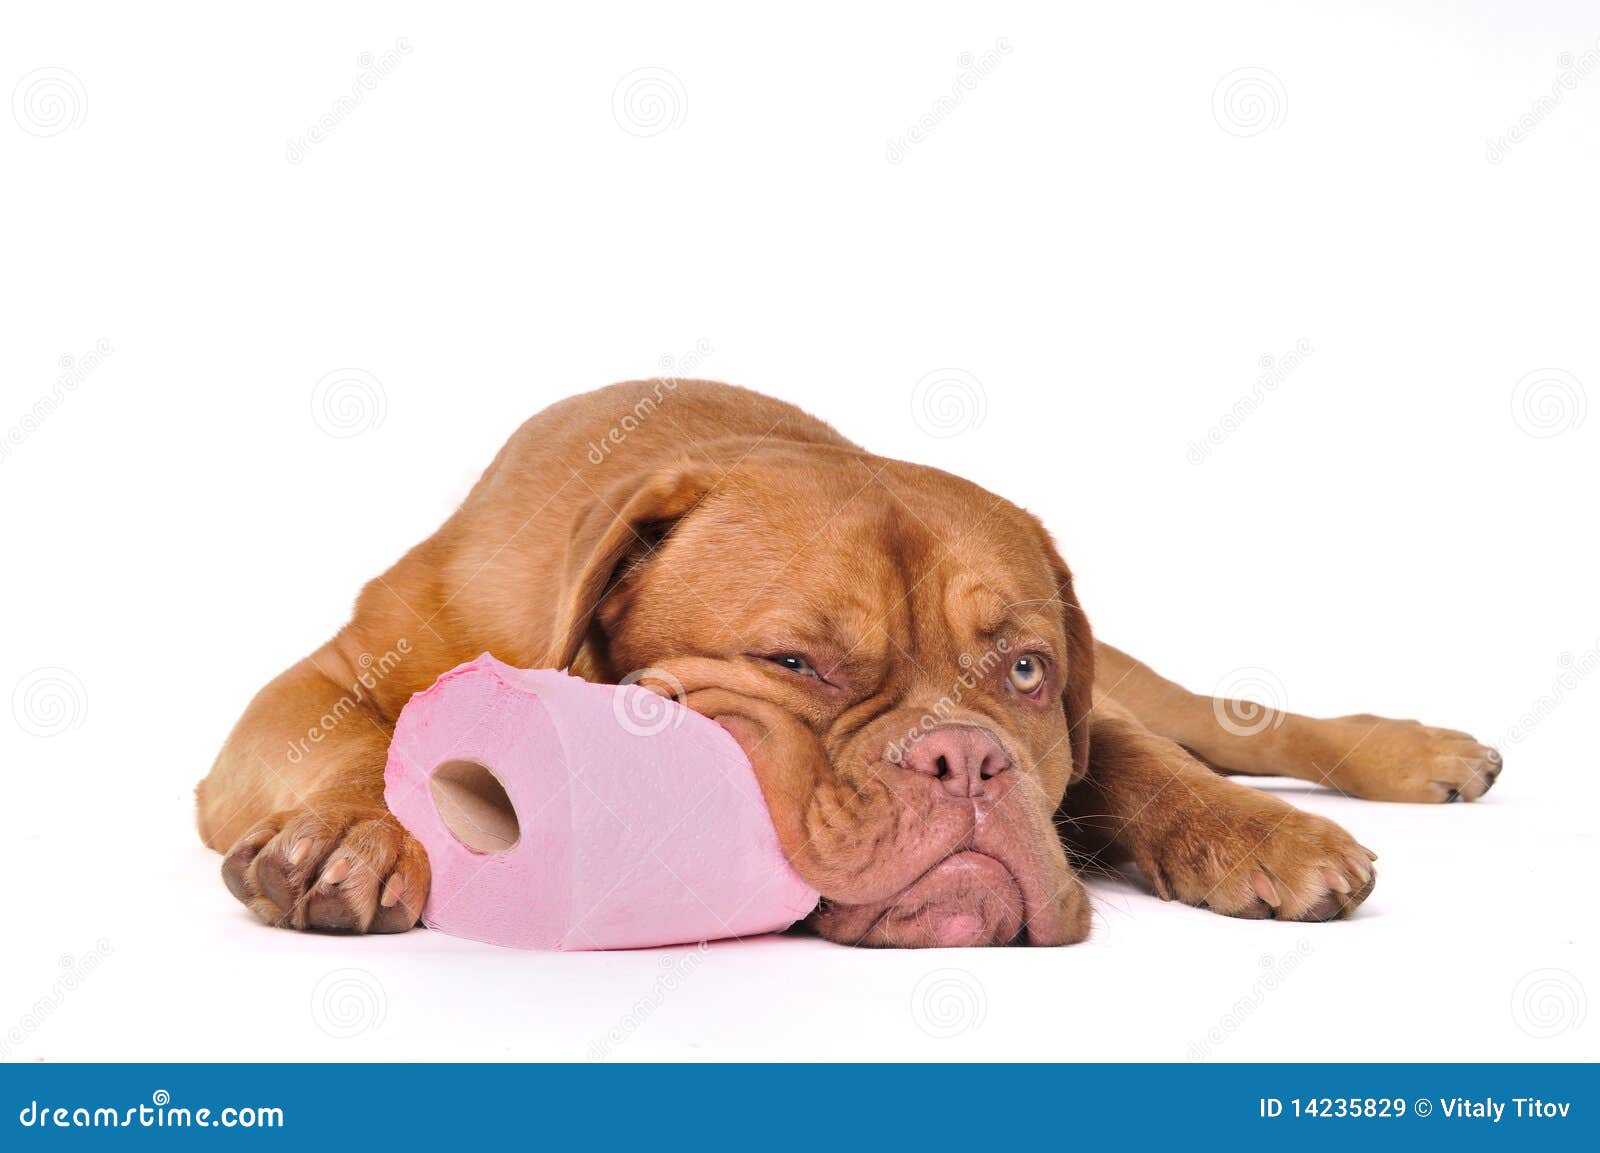 Puppy With Toilet Paper Royalty Free Stock Images - Image: 14235829